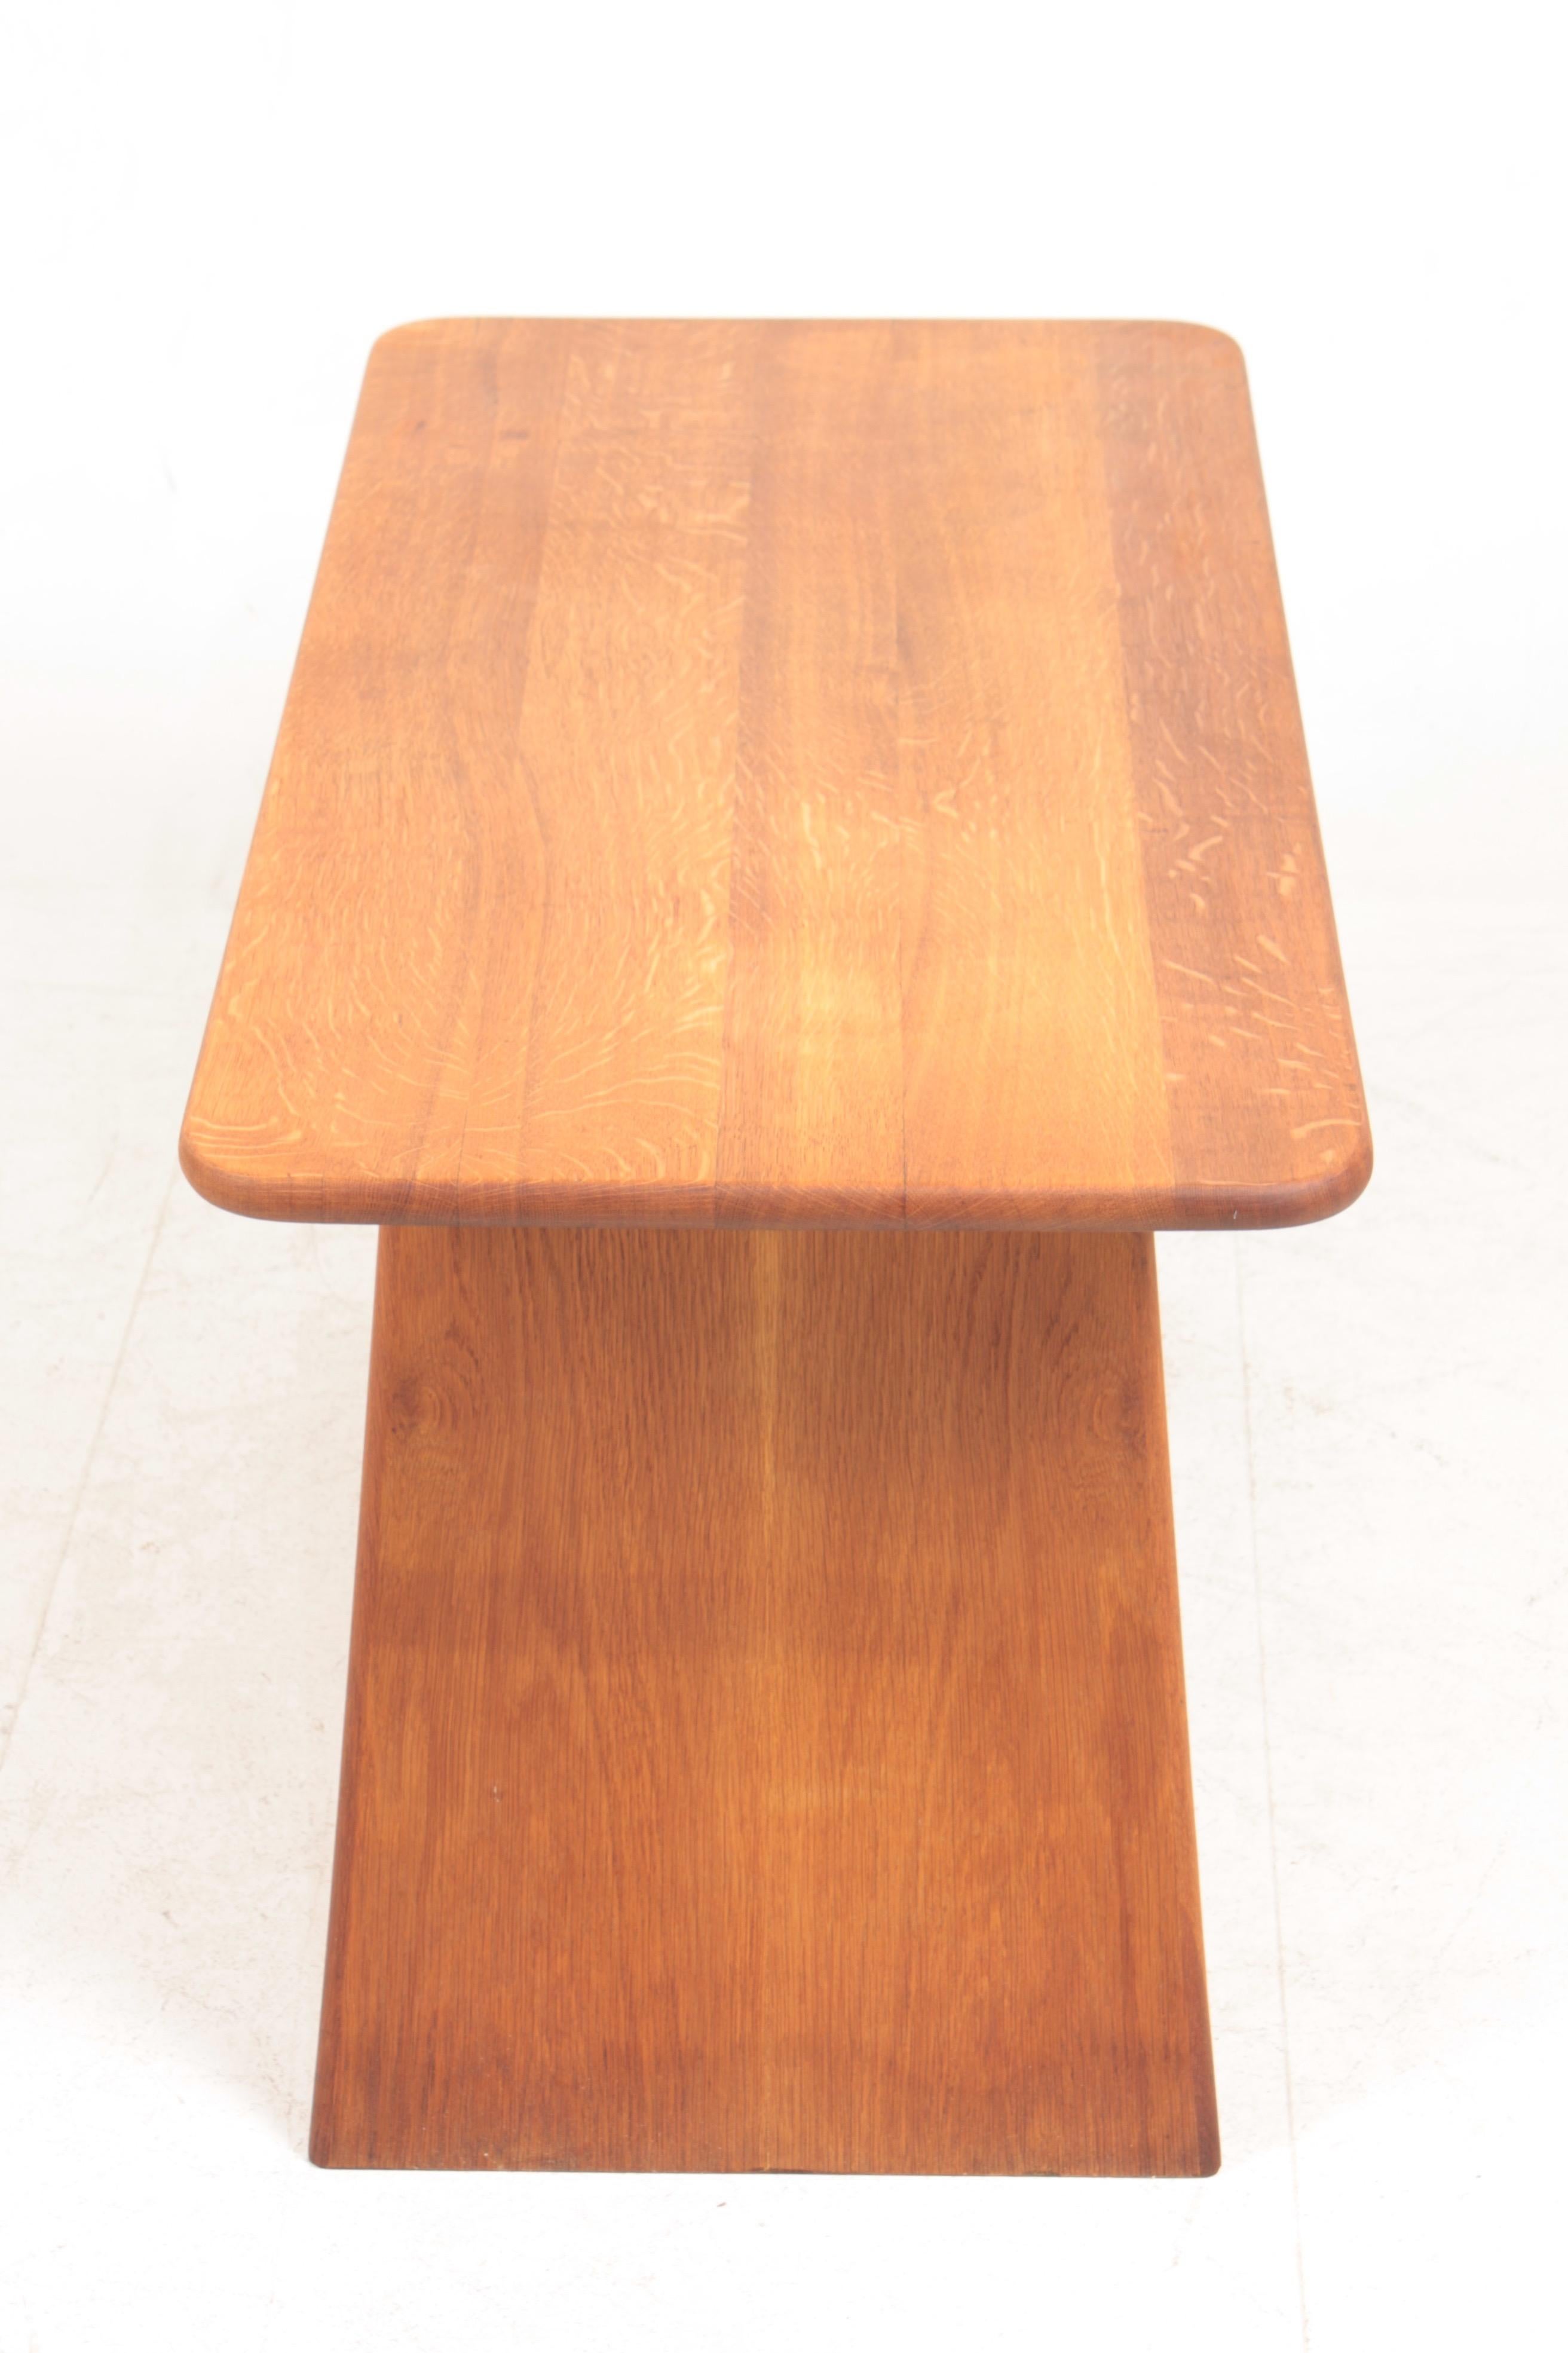 Midcentury Low Table in Solid Oak, Danish Cabinetmaker, 1950s In Good Condition For Sale In Lejre, DK